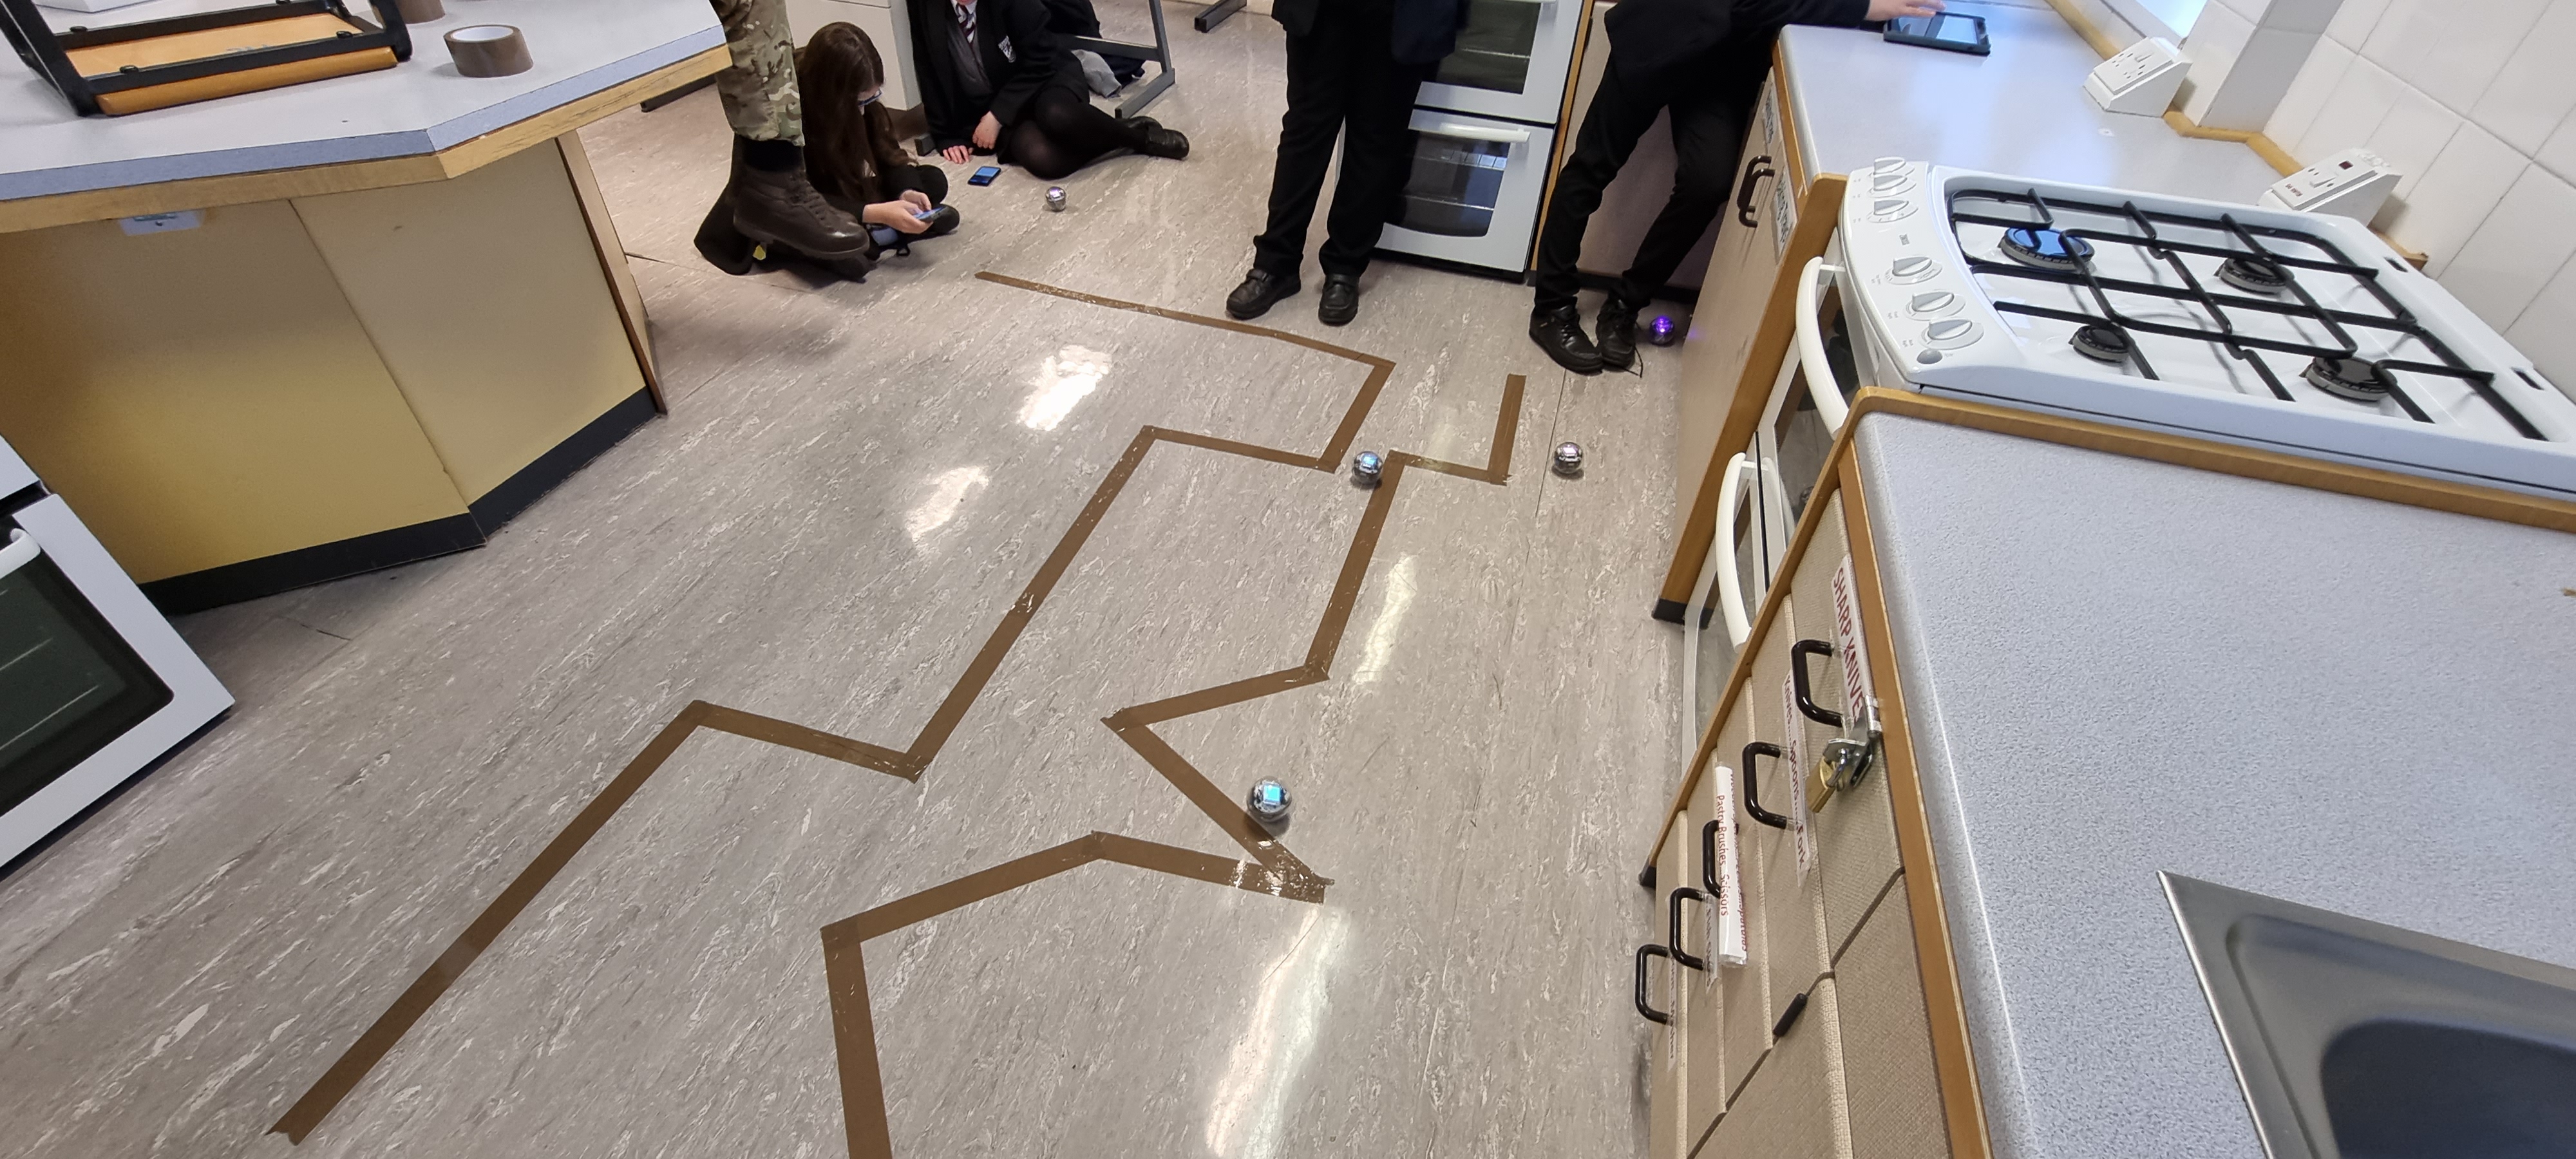 Students push sphero balls along course laid out on the ground.